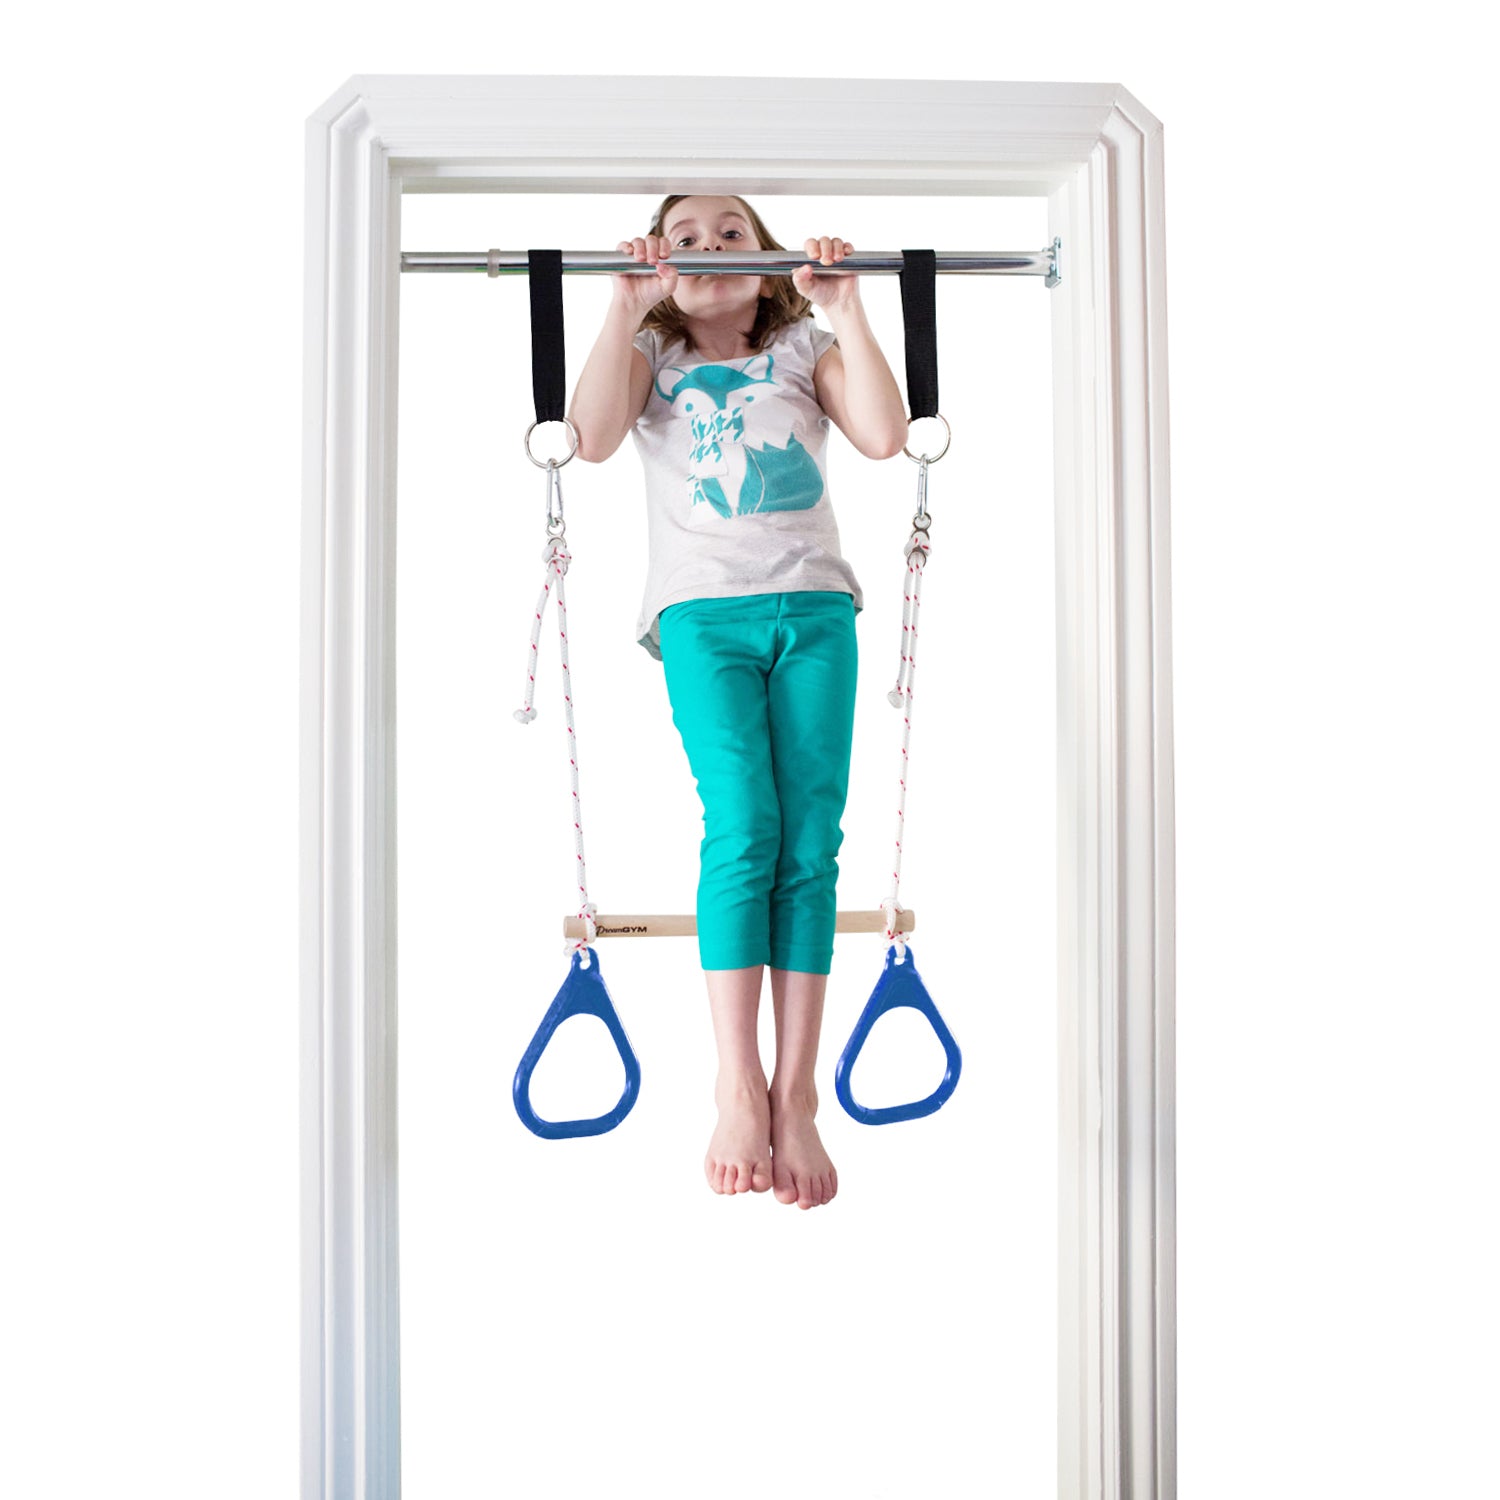 Doorway Trapeze Bar and Gym Rings Combo - Blue - DreamGYM